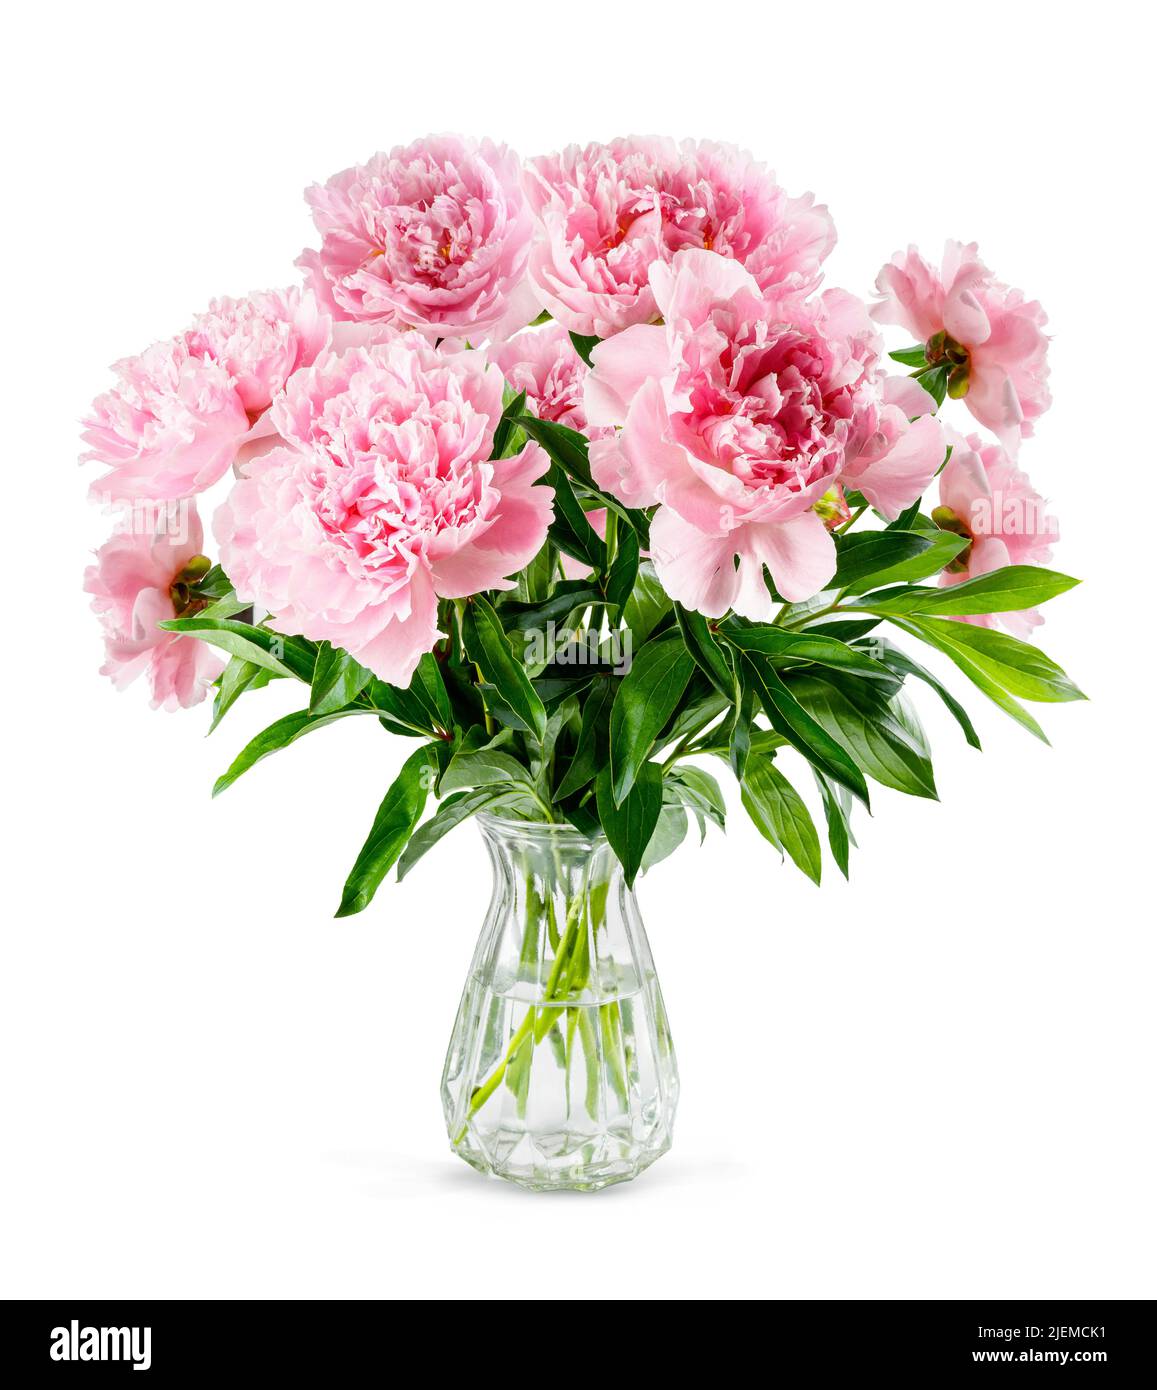 Pink peony flowers in glass vase isolated on white background. Bouquet of peonies. Stock Photo